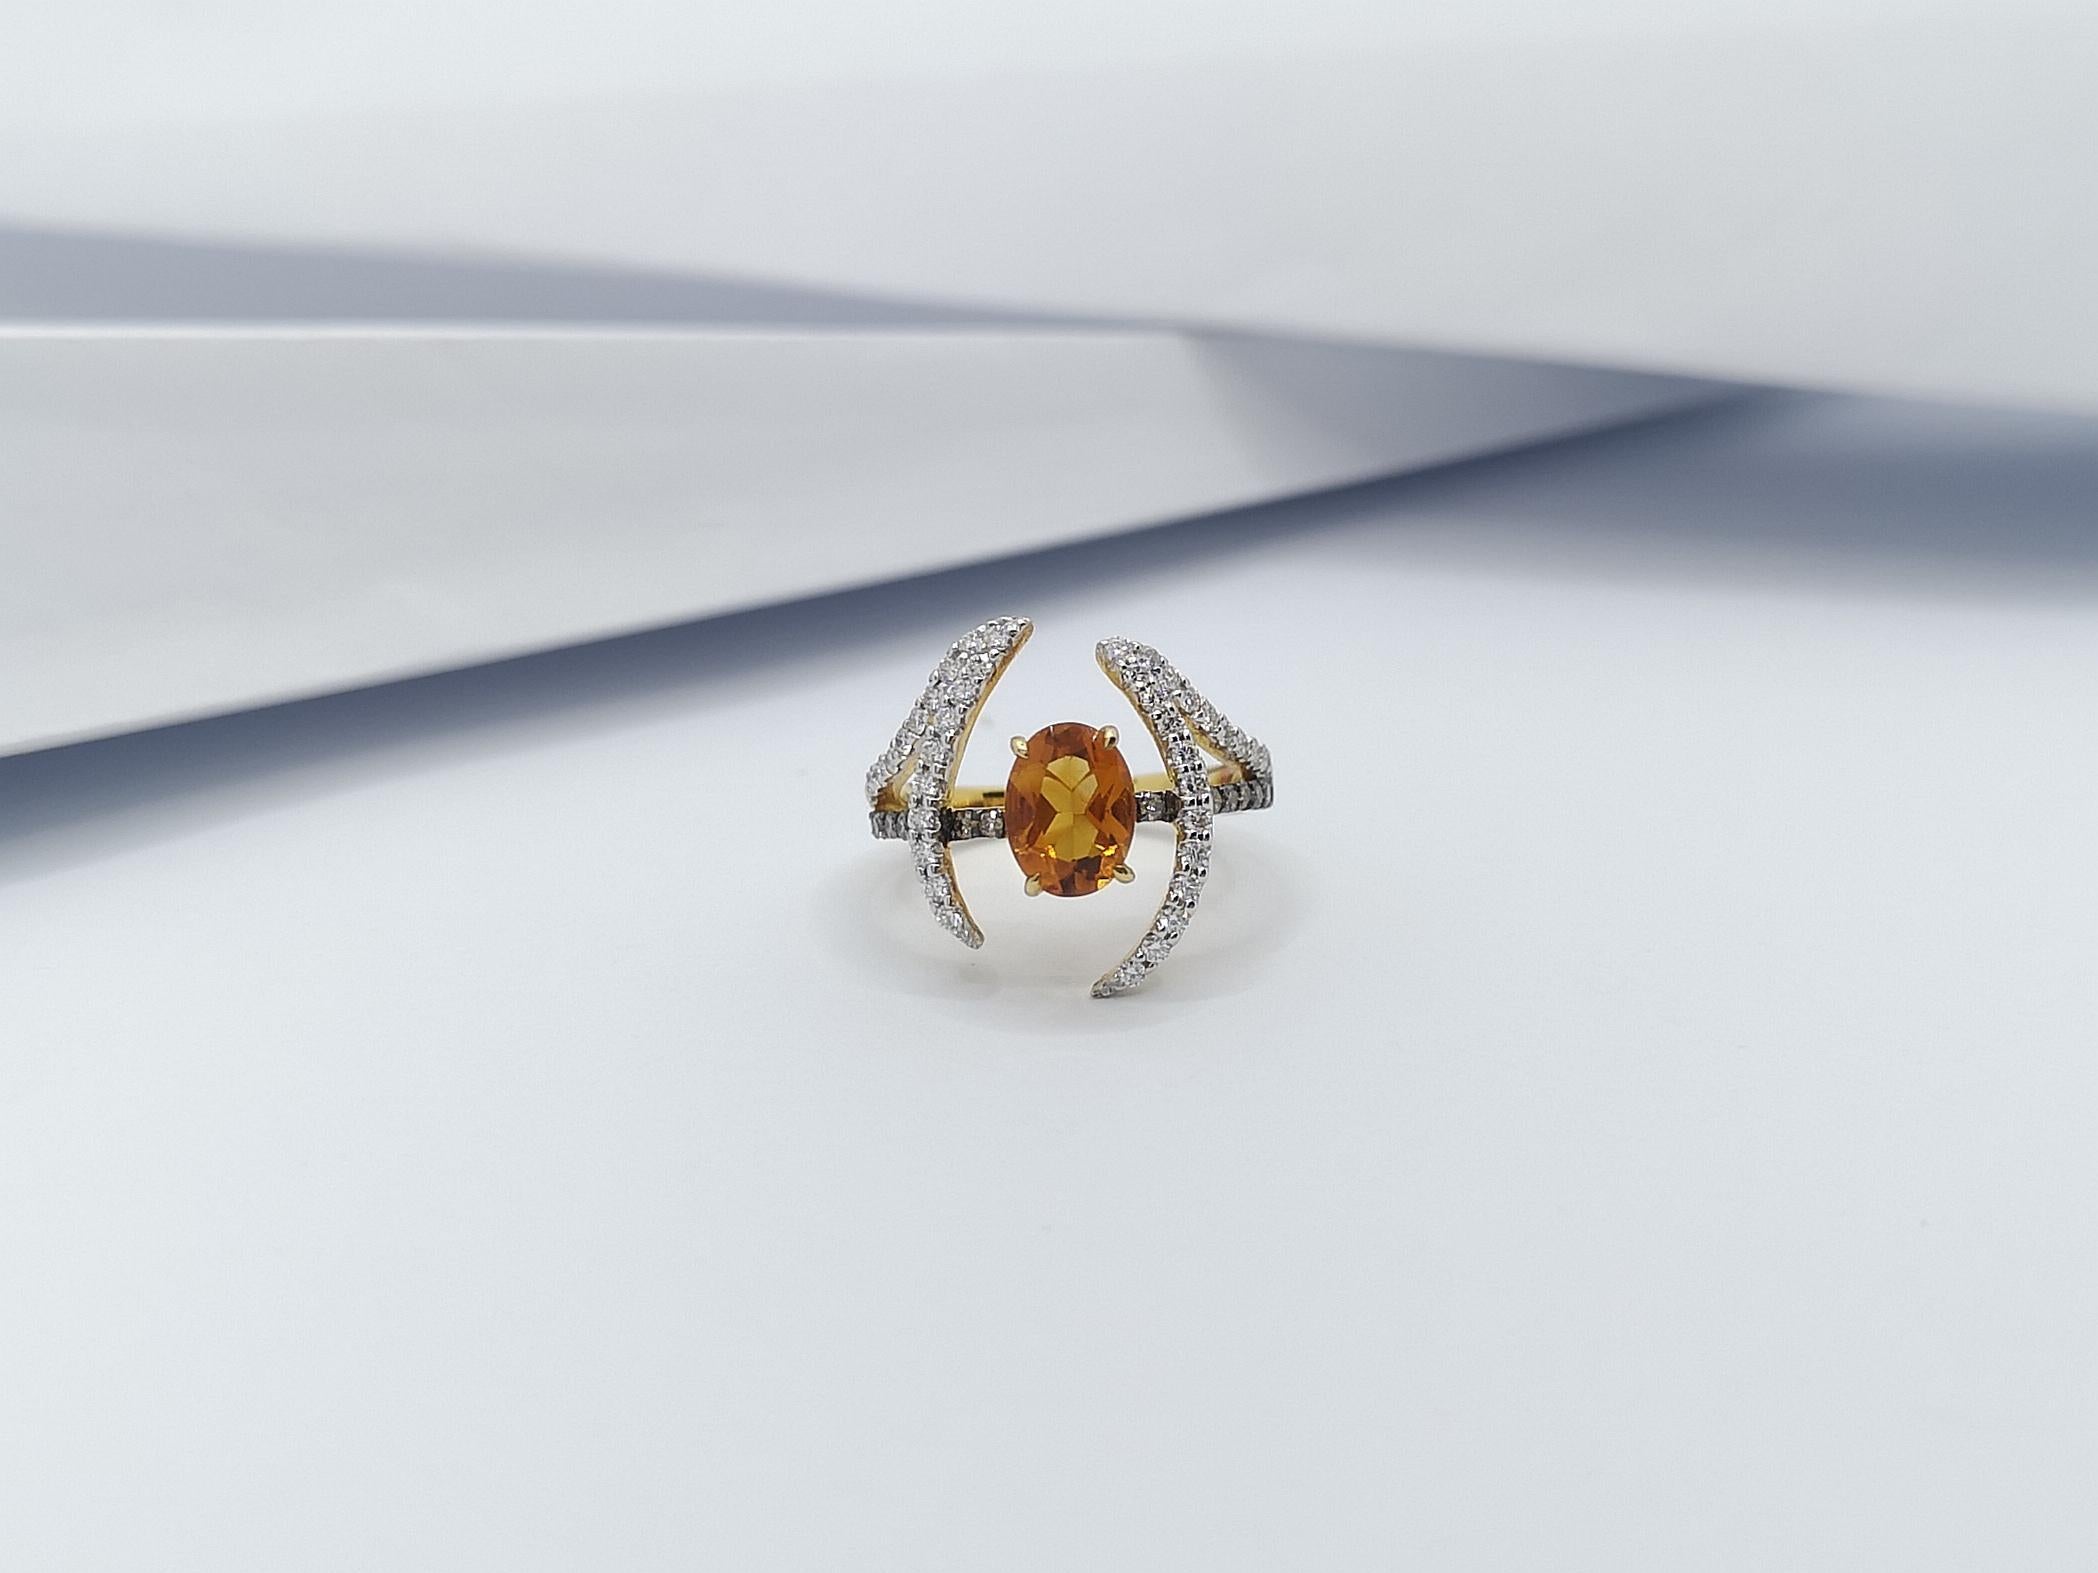 Citrine, Brown Diamond and Diamond Ring Set in 18k Gold by Kavant & Sharart 13